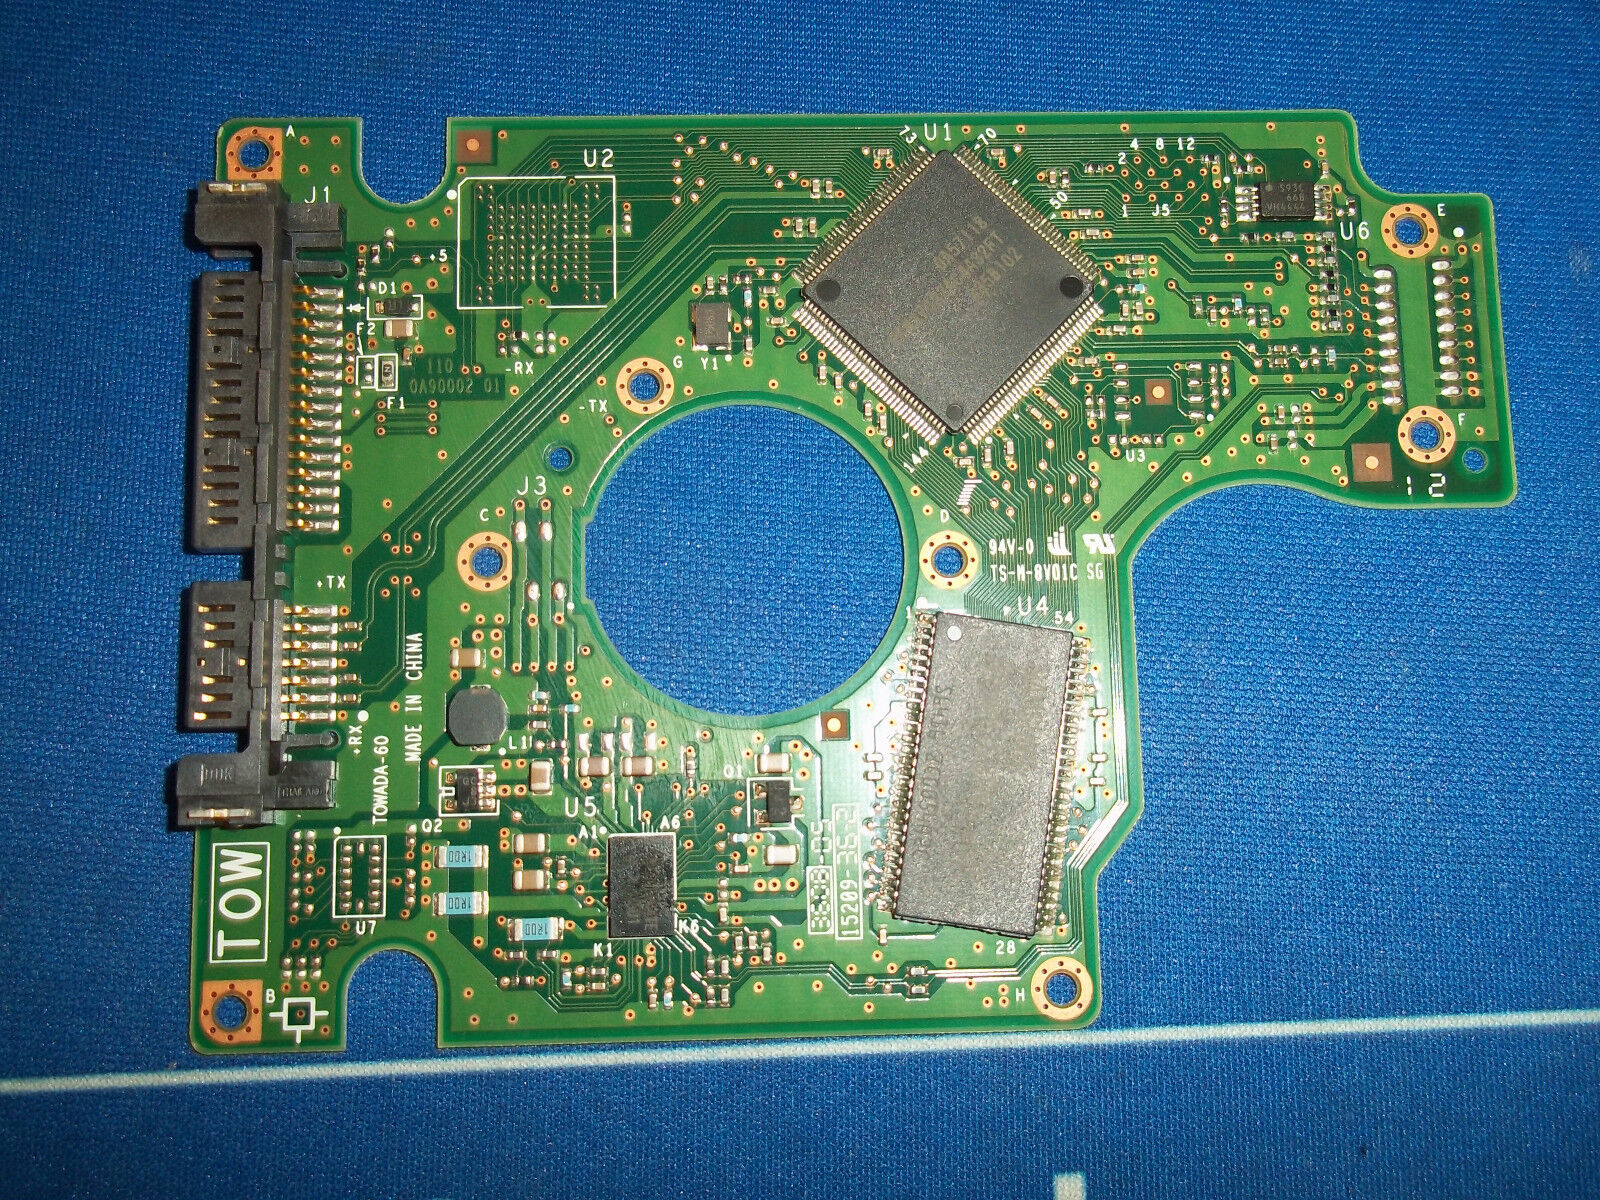 HITACHI 5K320-160 2.5 120GB DATE:OCT06 220 0A90002 01 PCB ONLY